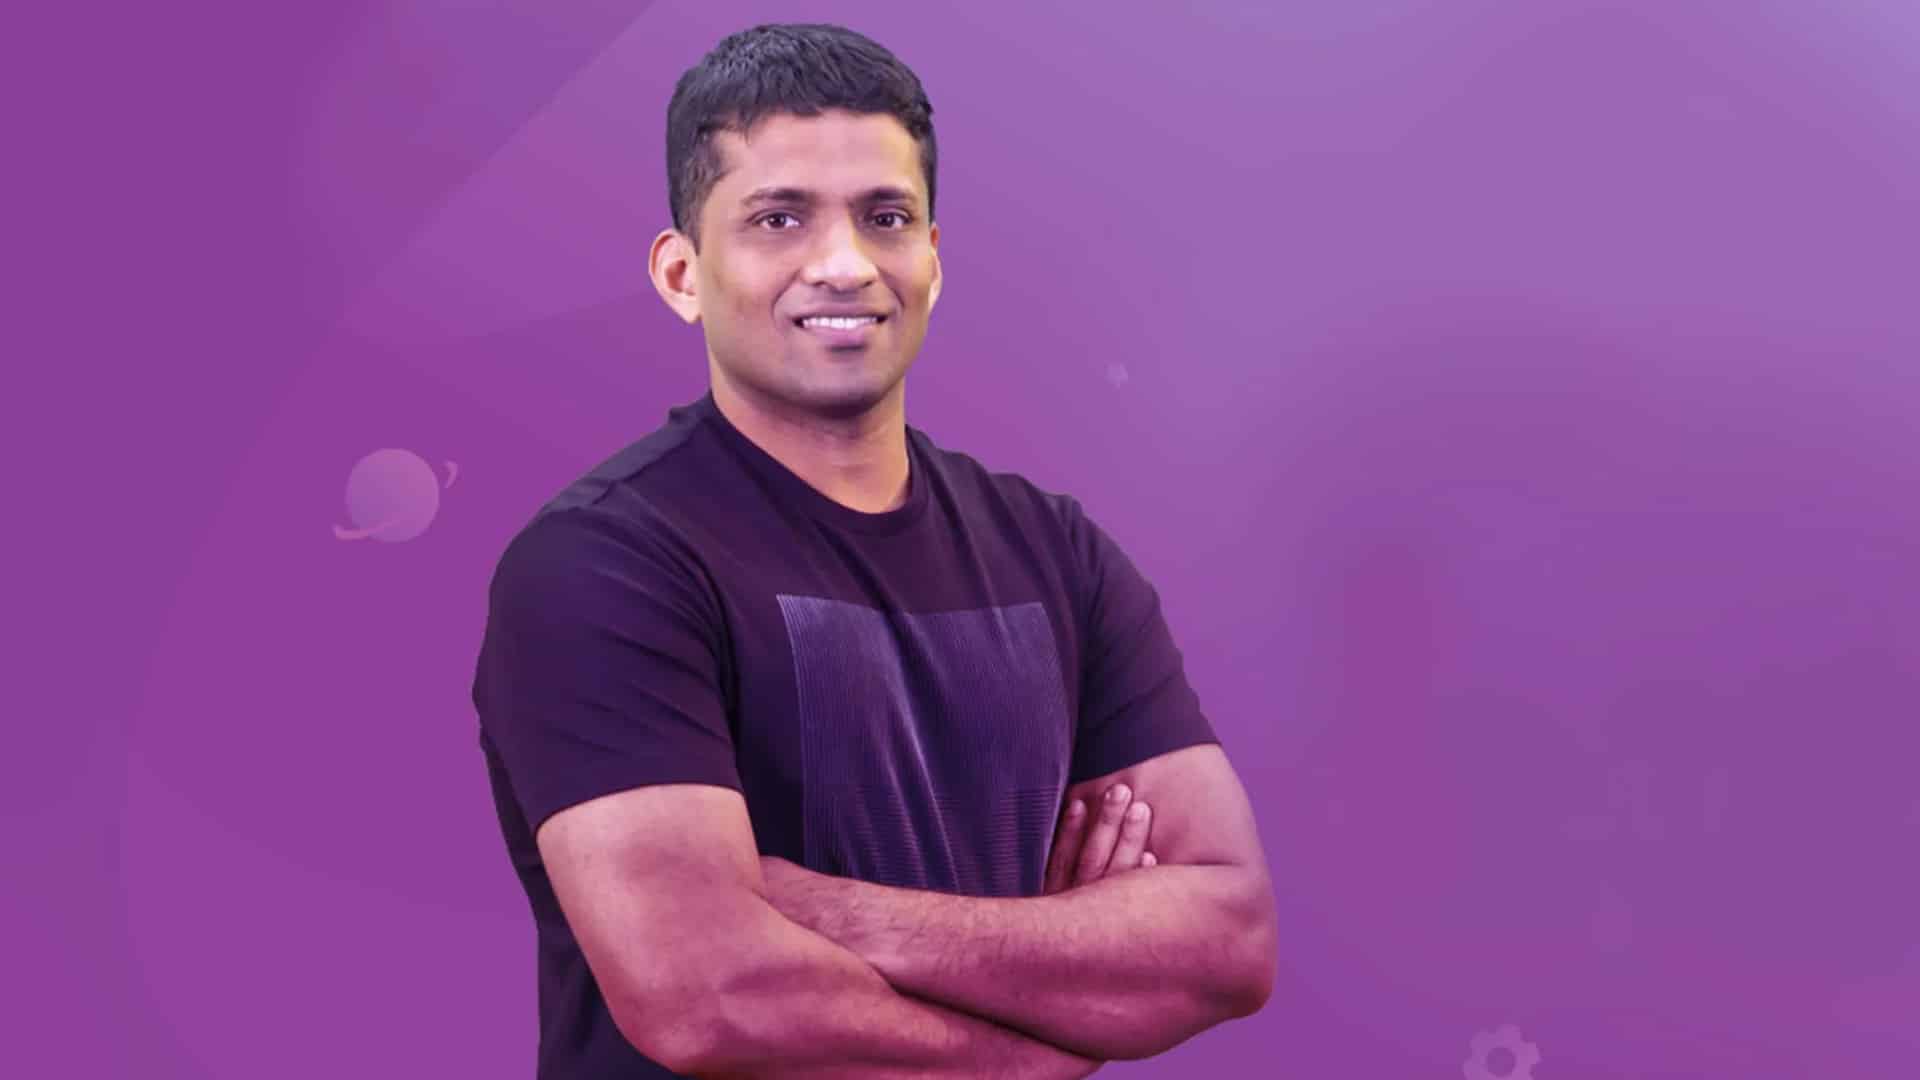 ED searches: Byju's CEO says brought more FDI to India than any other startup, company in compliance